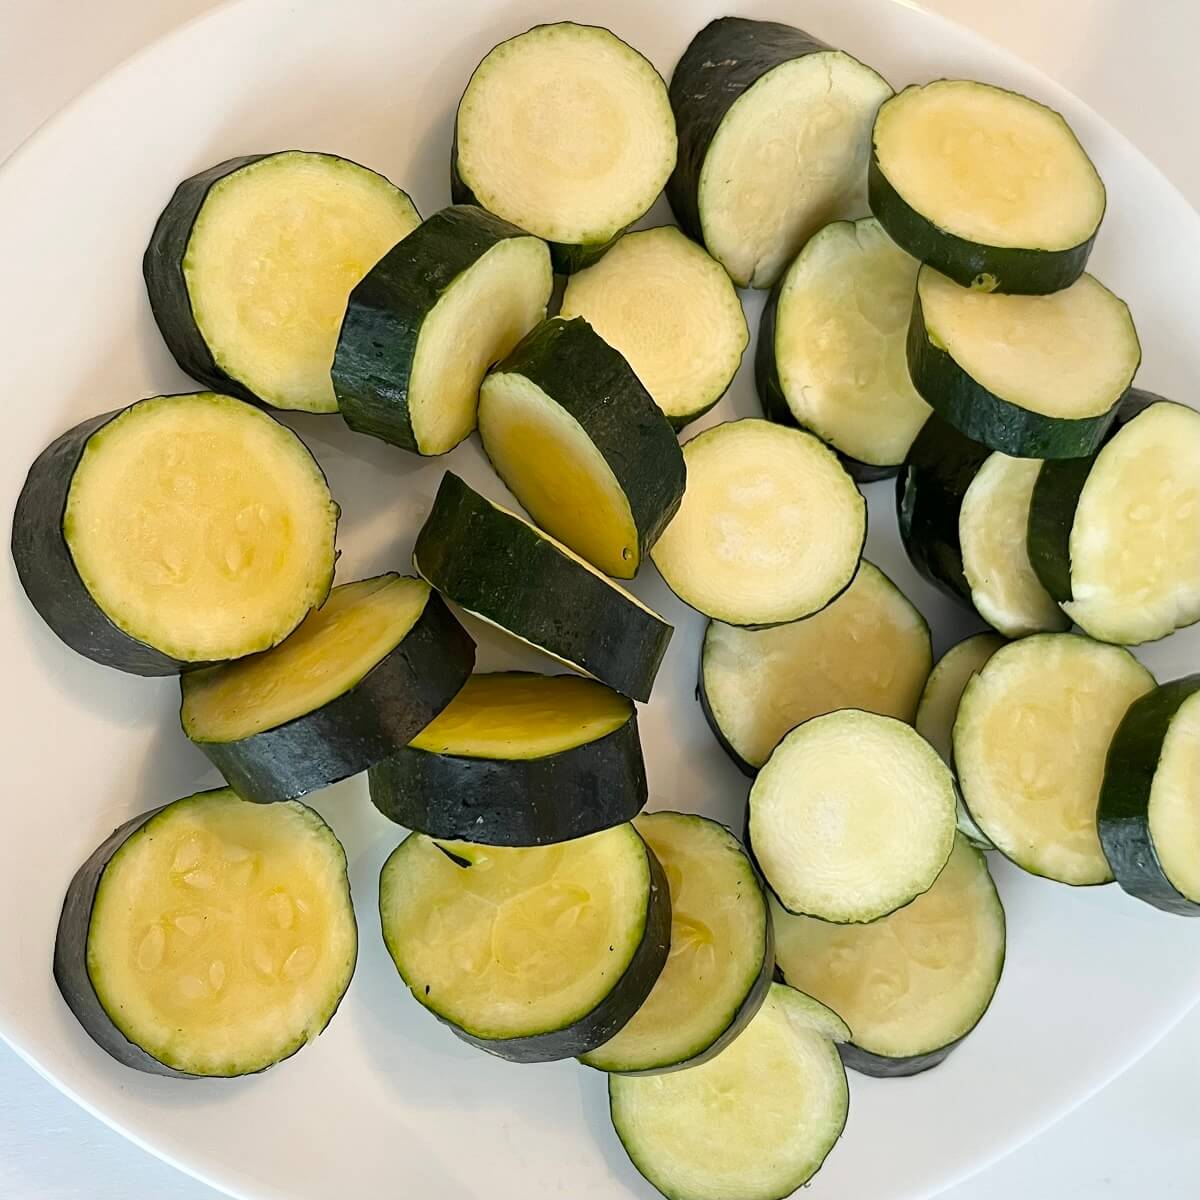 Raw zucchini slices on a white plate.